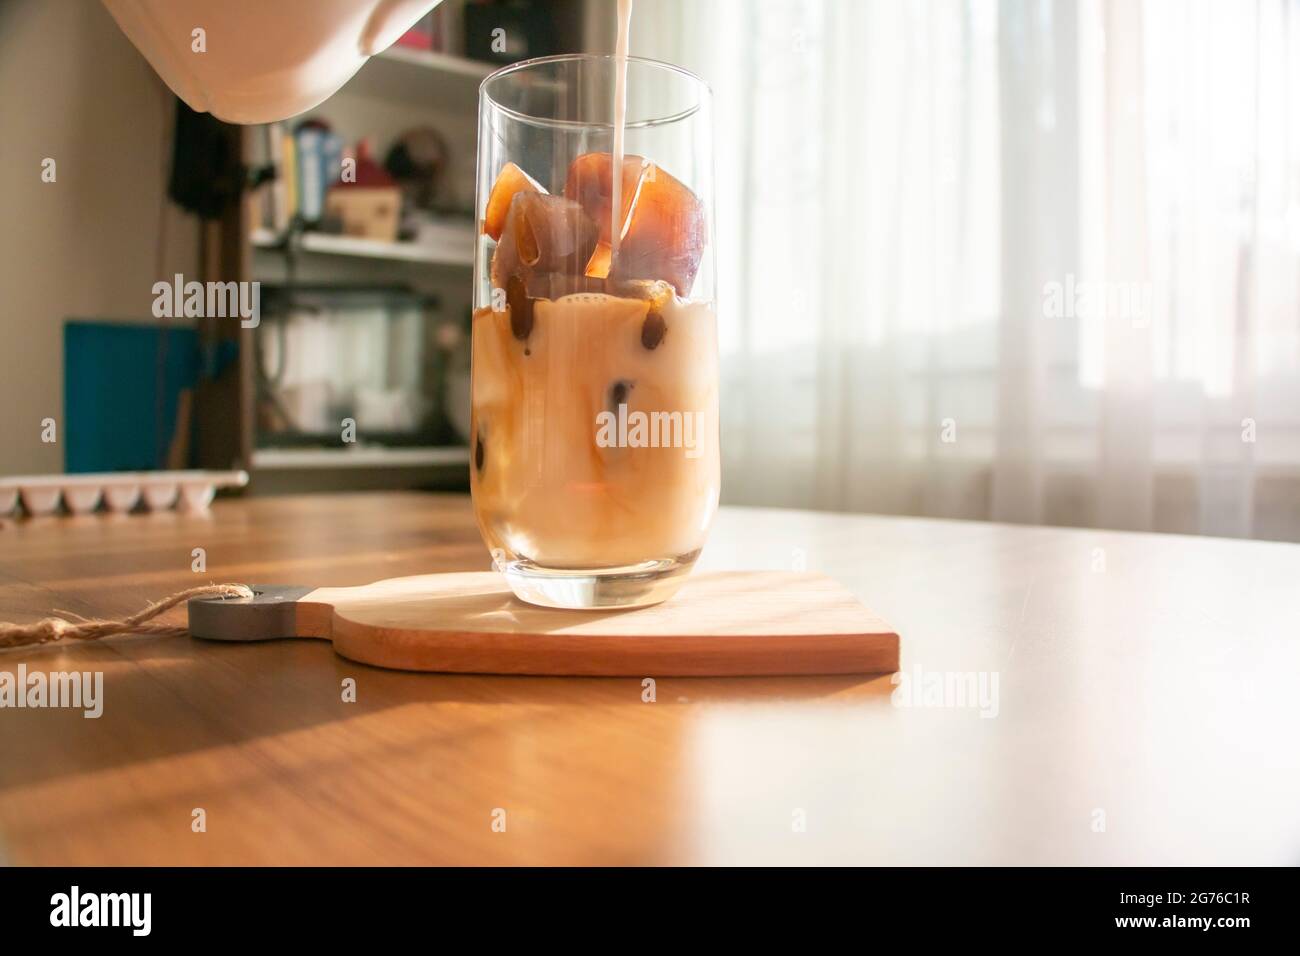 https://c8.alamy.com/comp/2G76C1R/making-a-refreshing-drink-by-making-ice-cubes-from-coffee-and-pouring-milk-into-a-glass-a-refreshing-drink-cold-coffee-on-a-summer-morning-2G76C1R.jpg